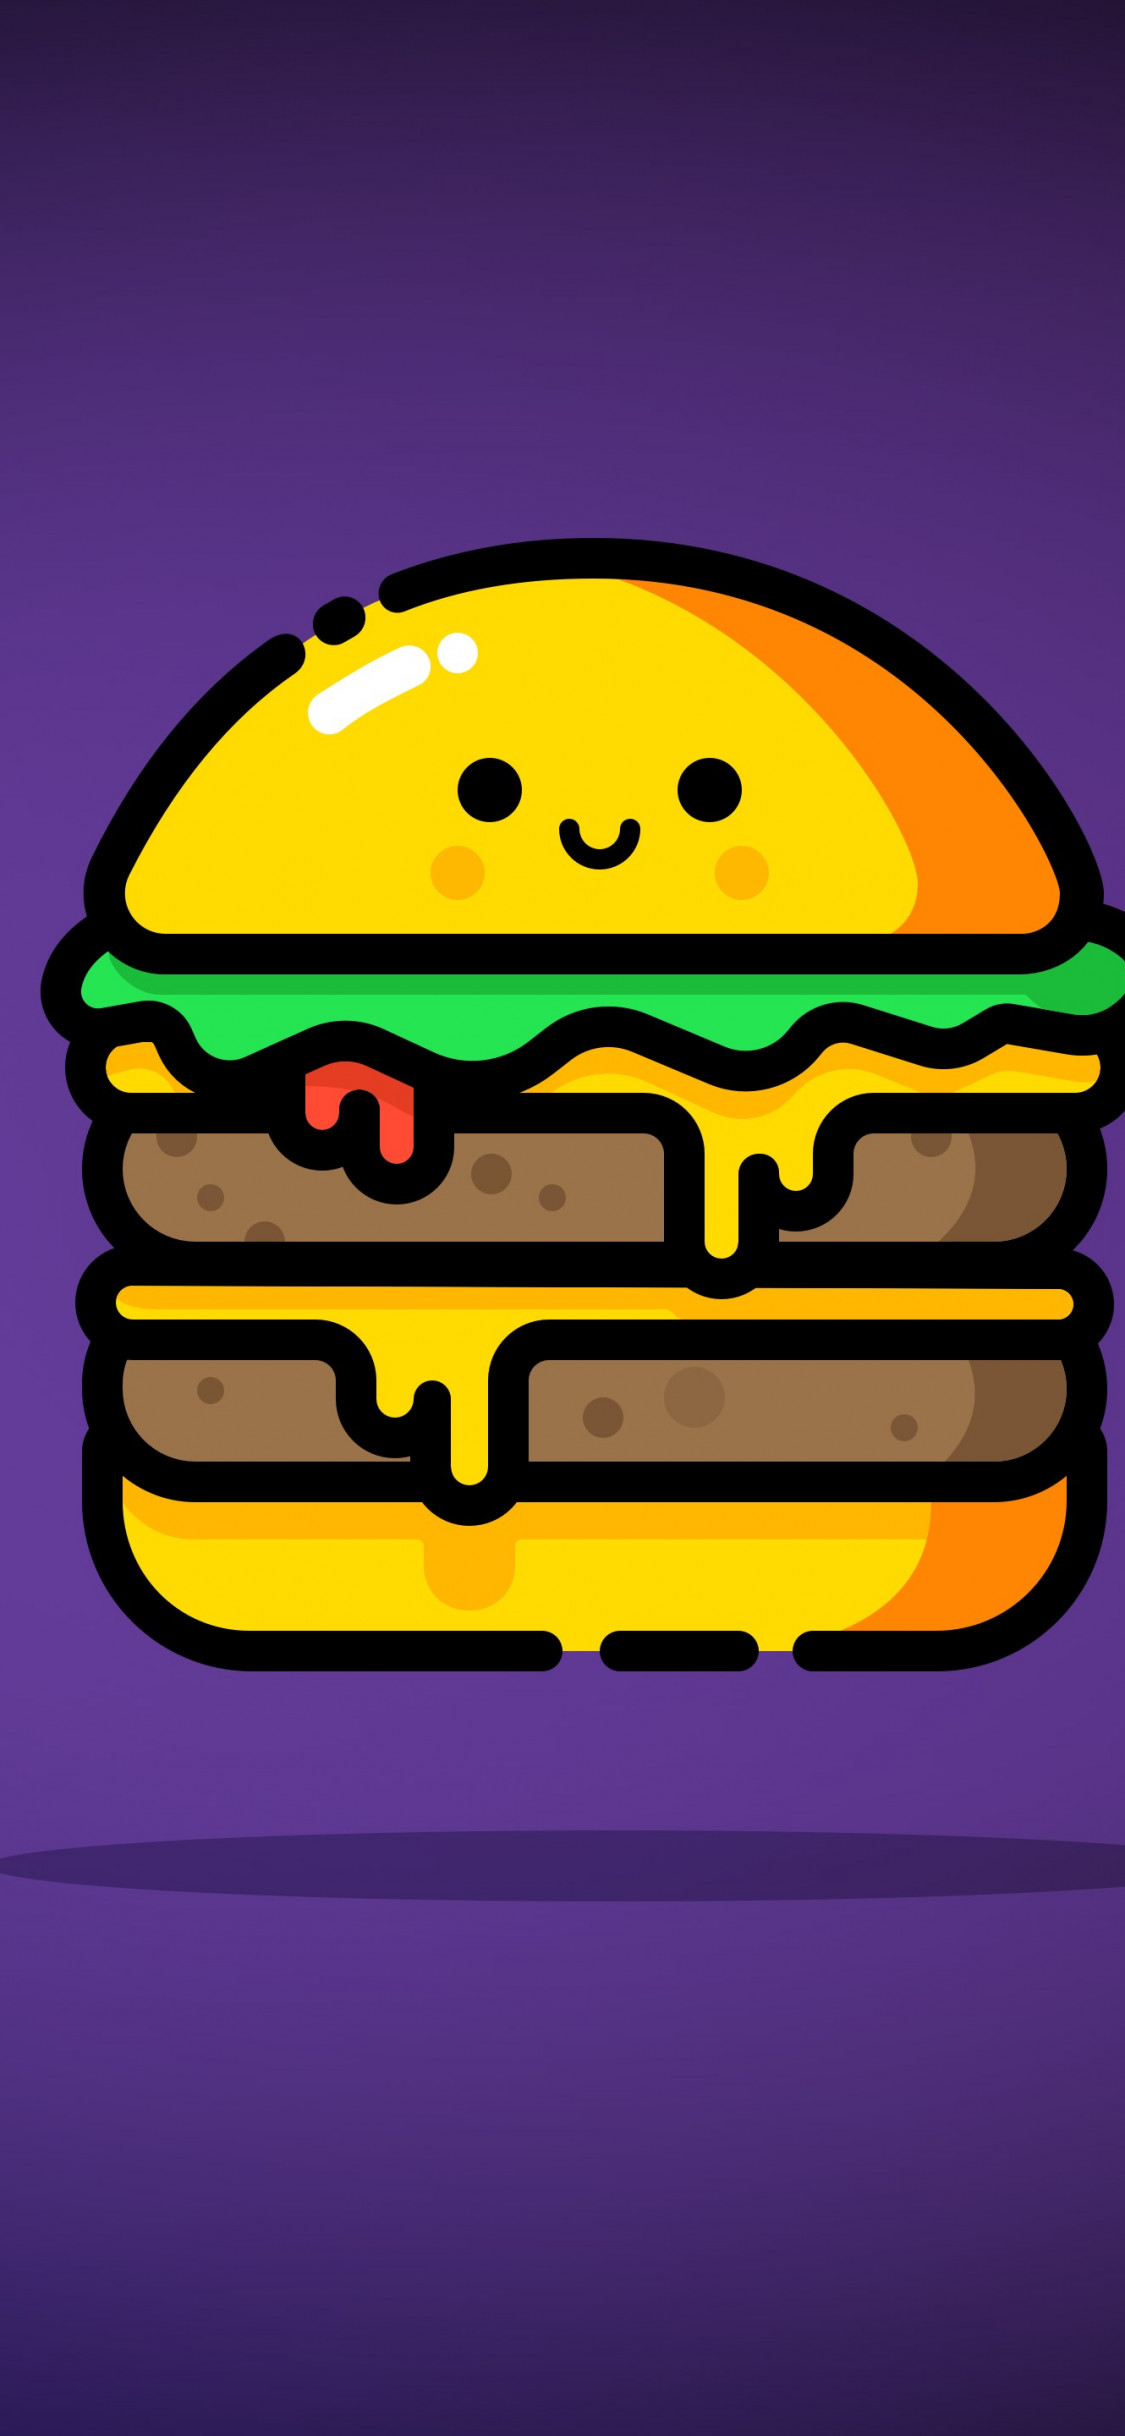 Double cheese wallpaper 1125x2436